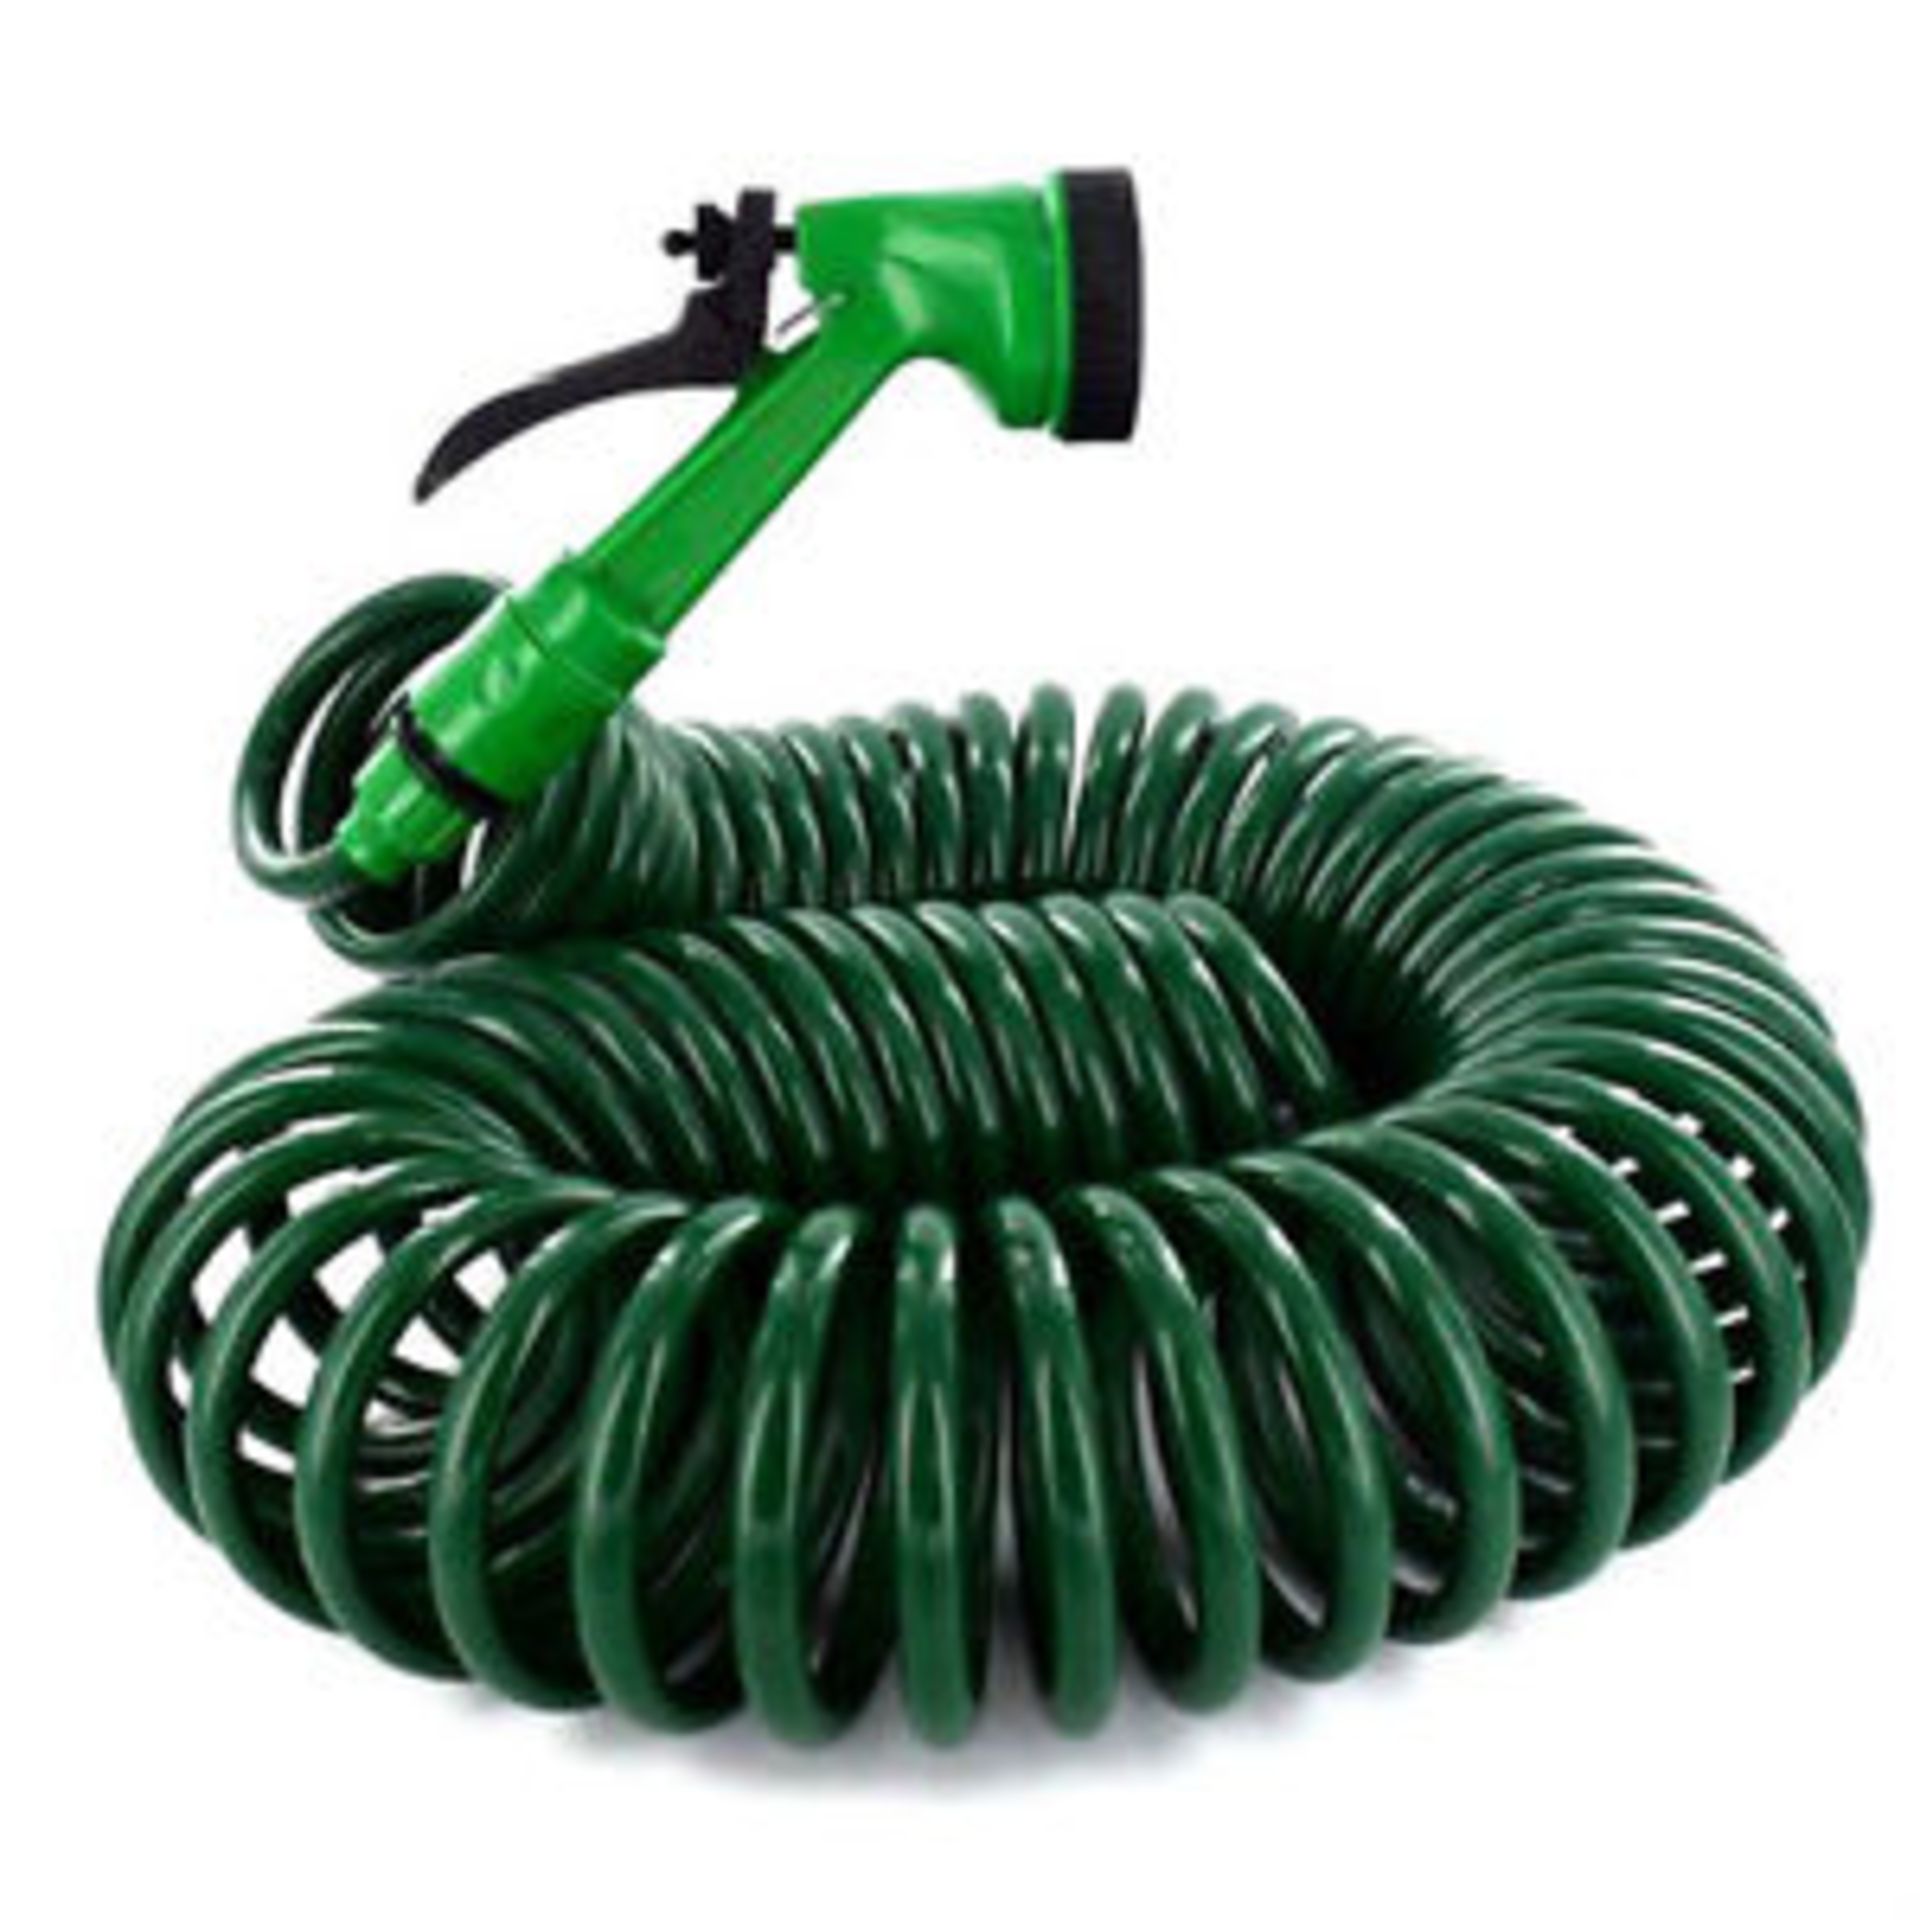 V Brand New 15m Coil Garden Lightweight Hose with Nozzle Set - 5 Funcions - 2 Female Hose Fittings -